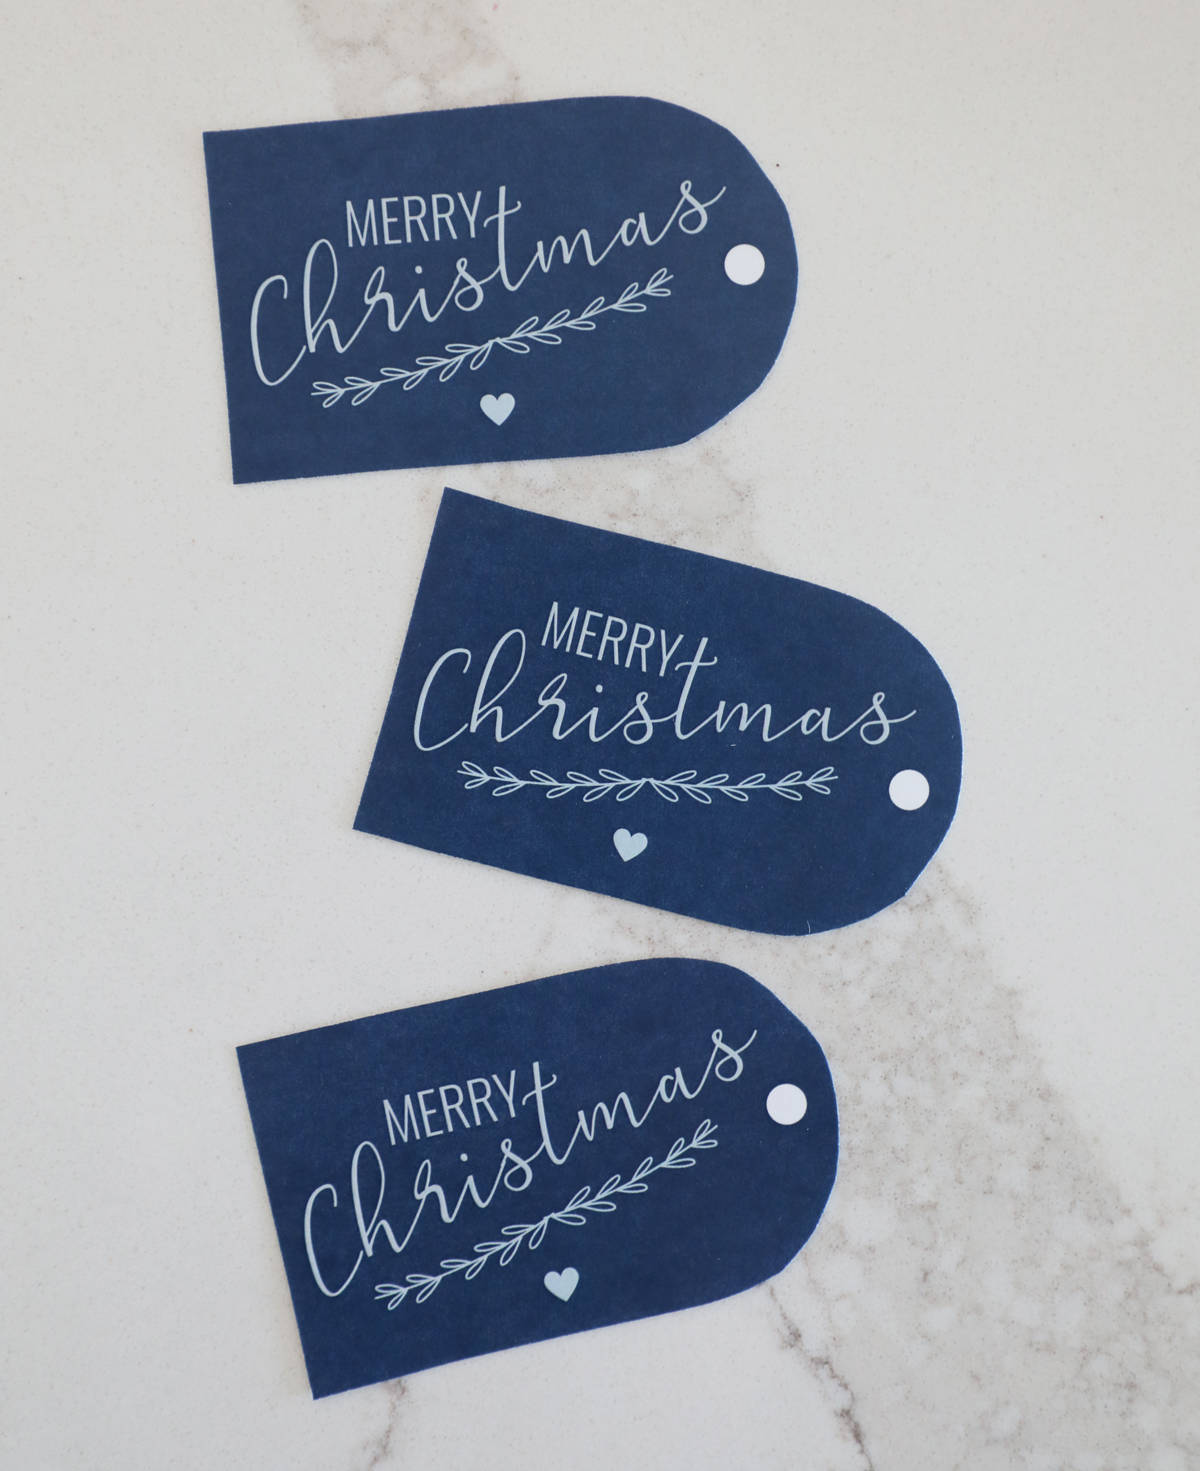 Three blue "Merry Christmas" printable gift tags on a white countertop. 